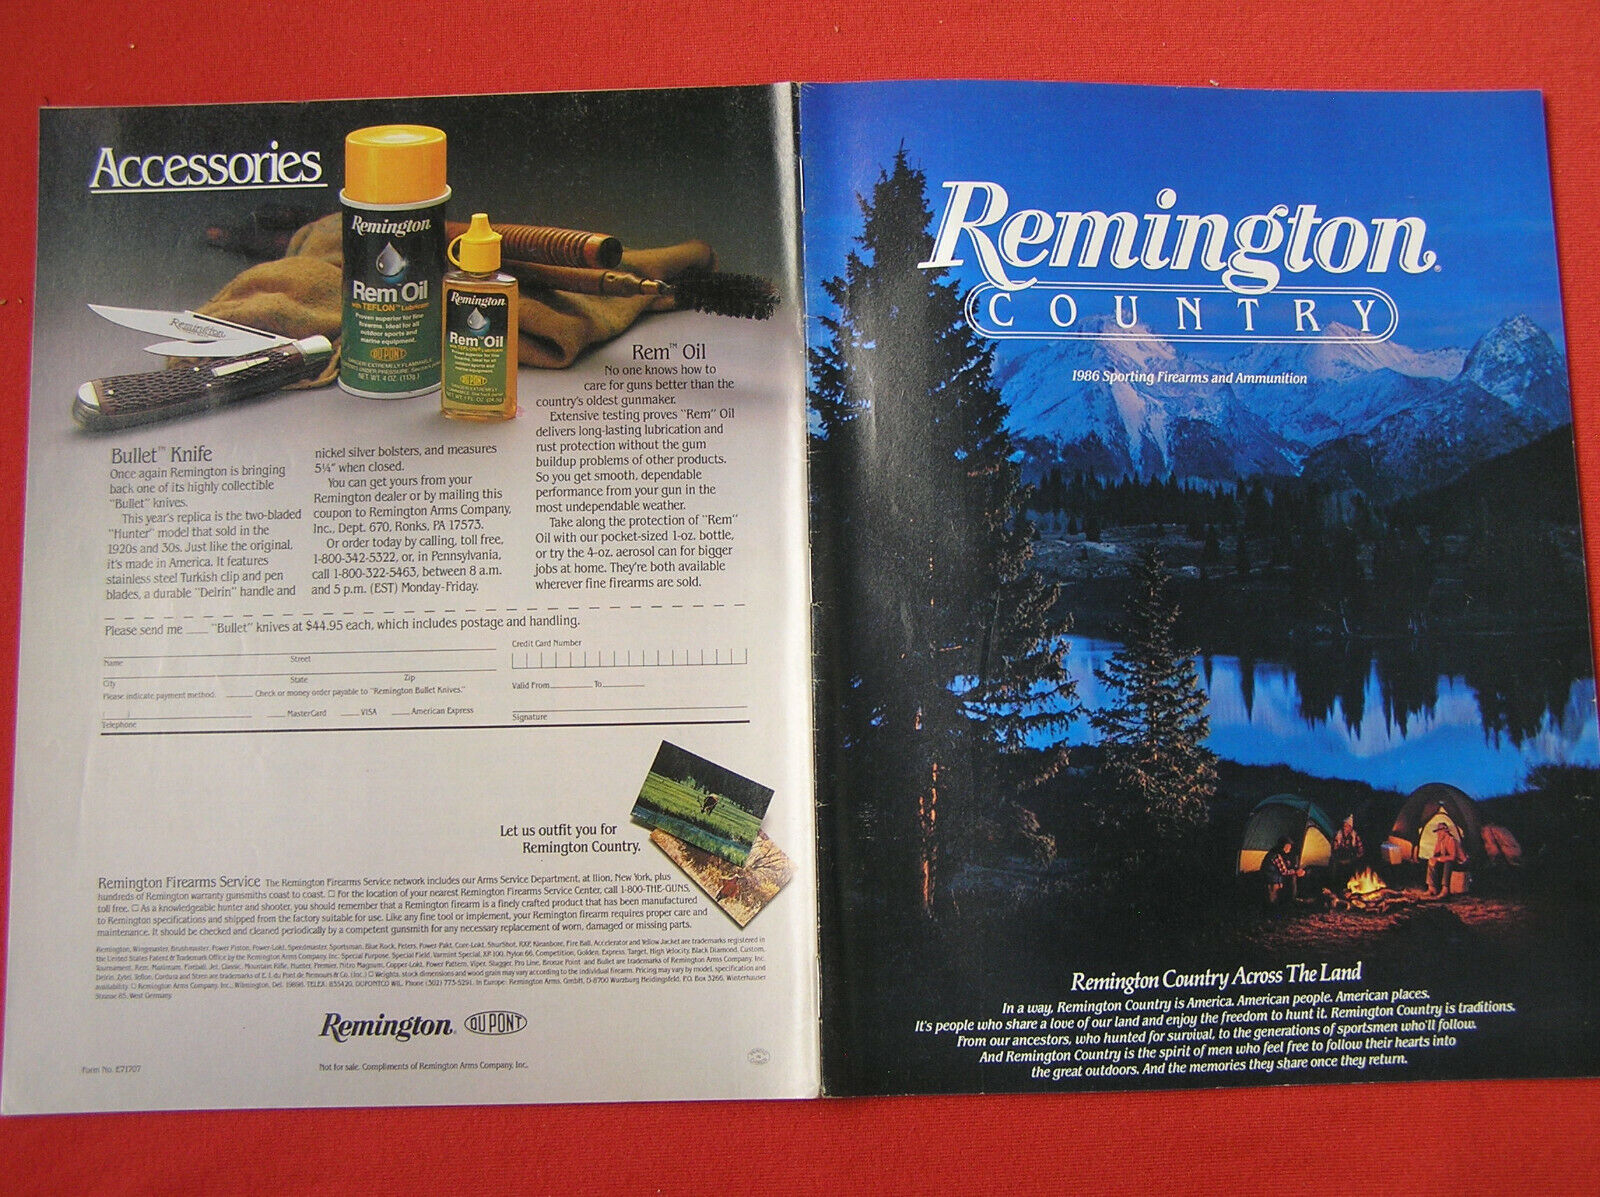 497. 1986 Remington-Dupont Sporting firearms & Ammunition brochure in color. Thi